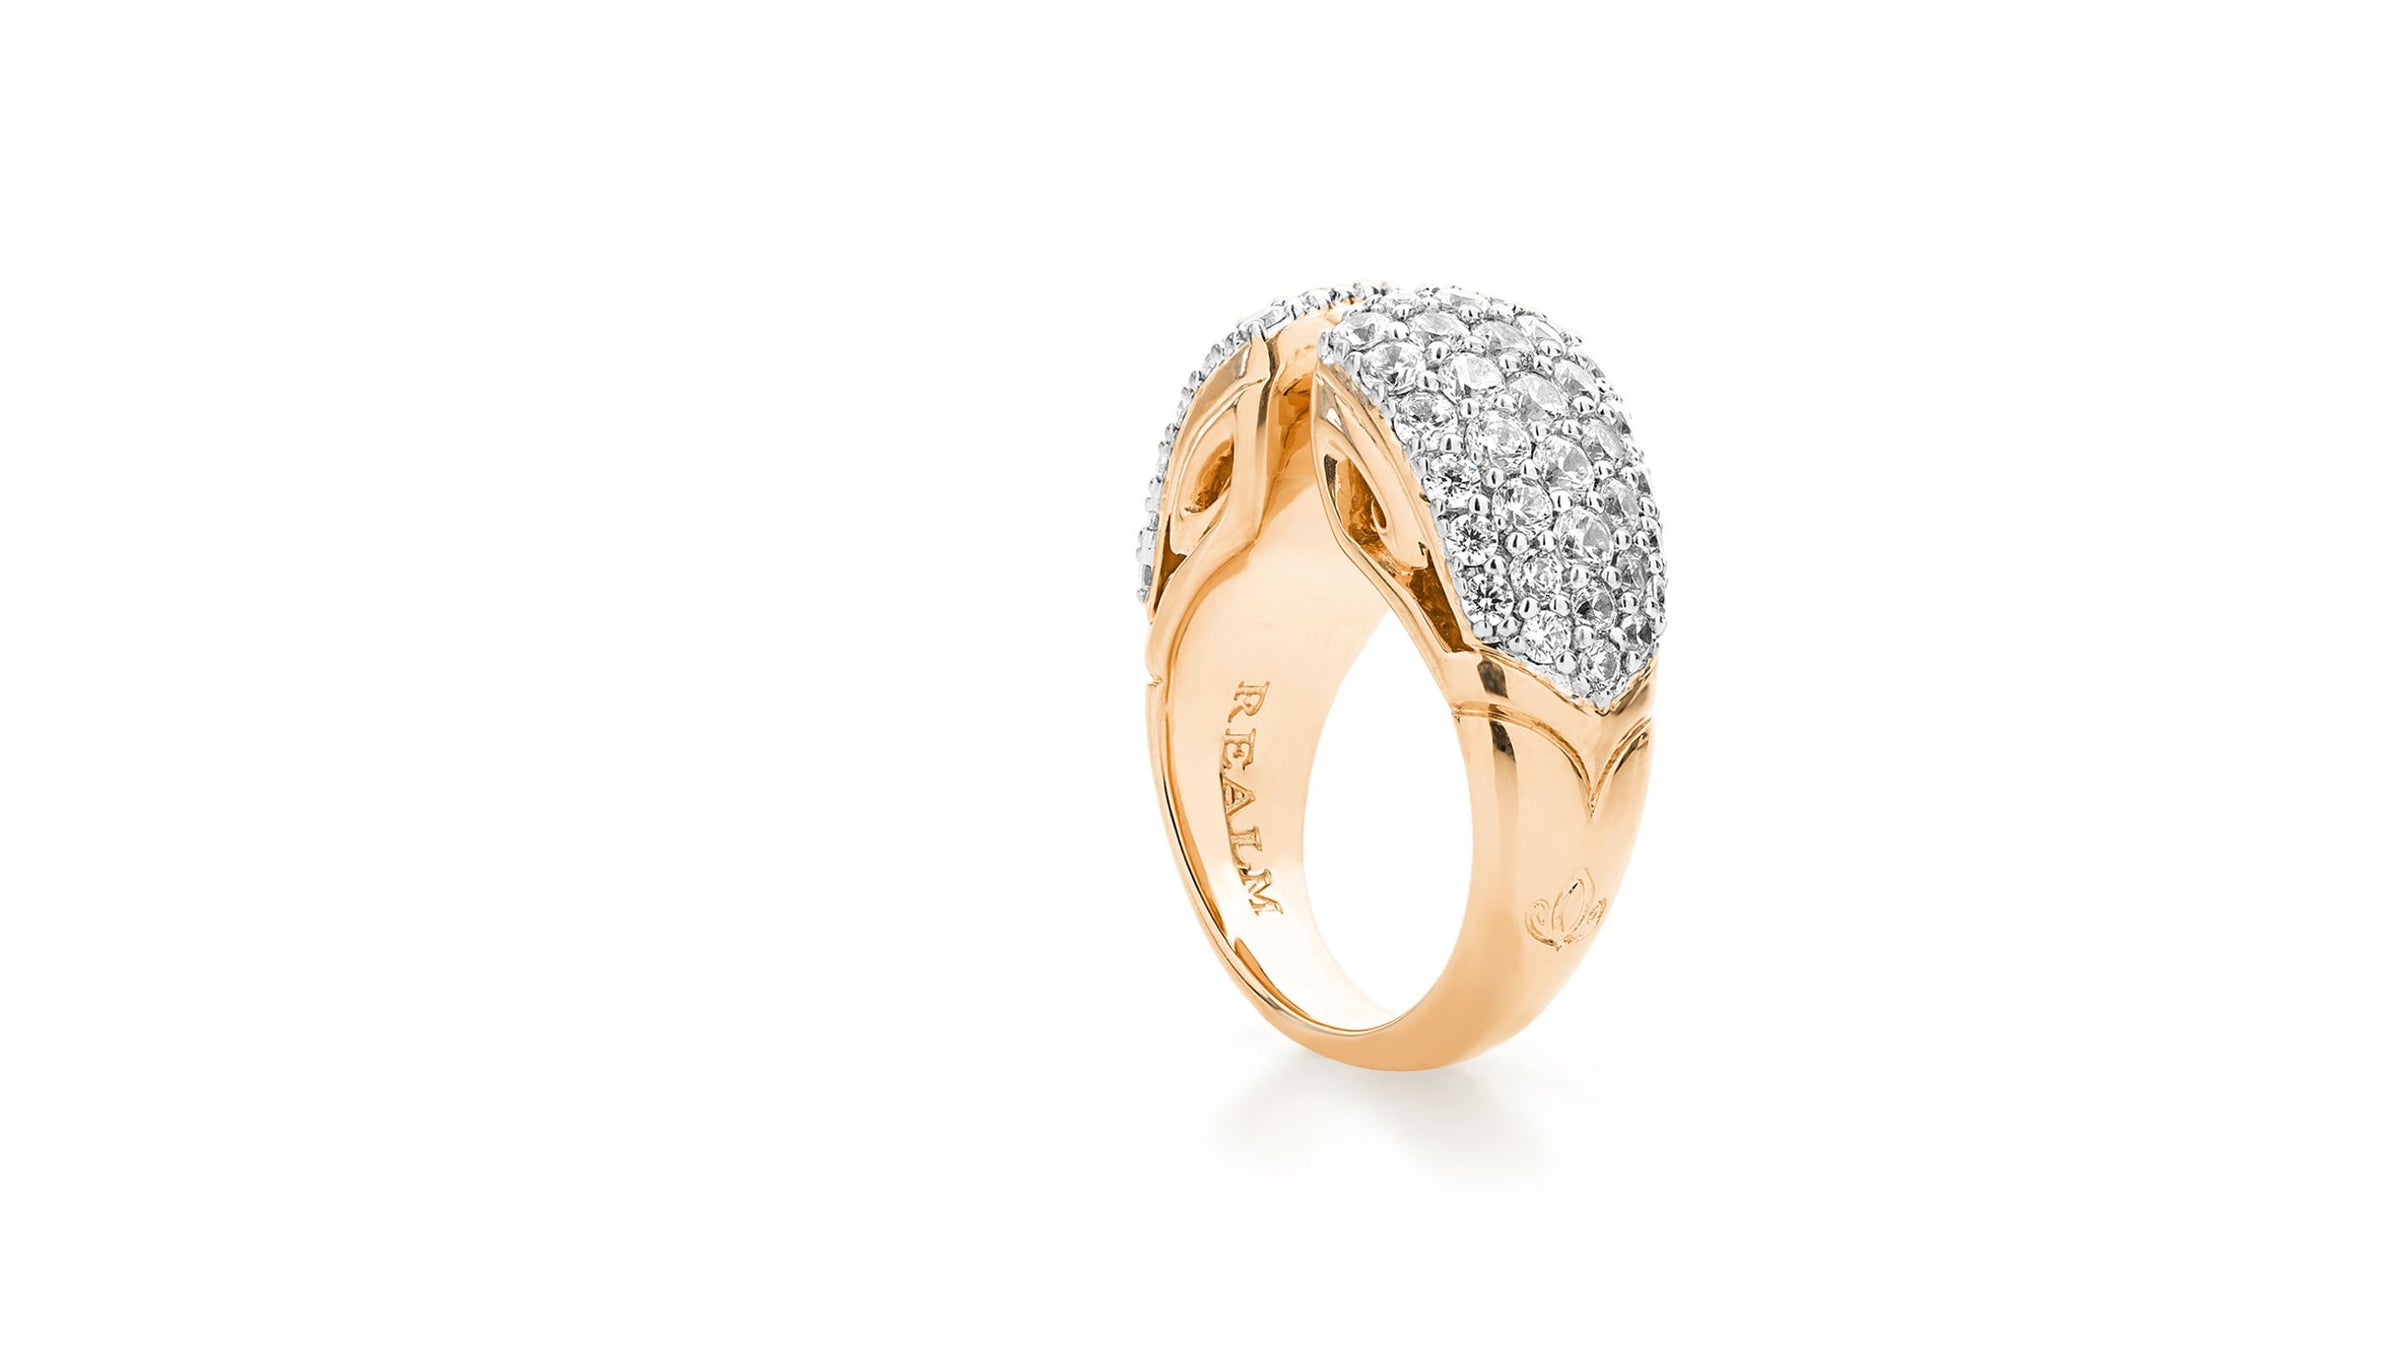 Luxurious statement ring in rose gold and cz blanc